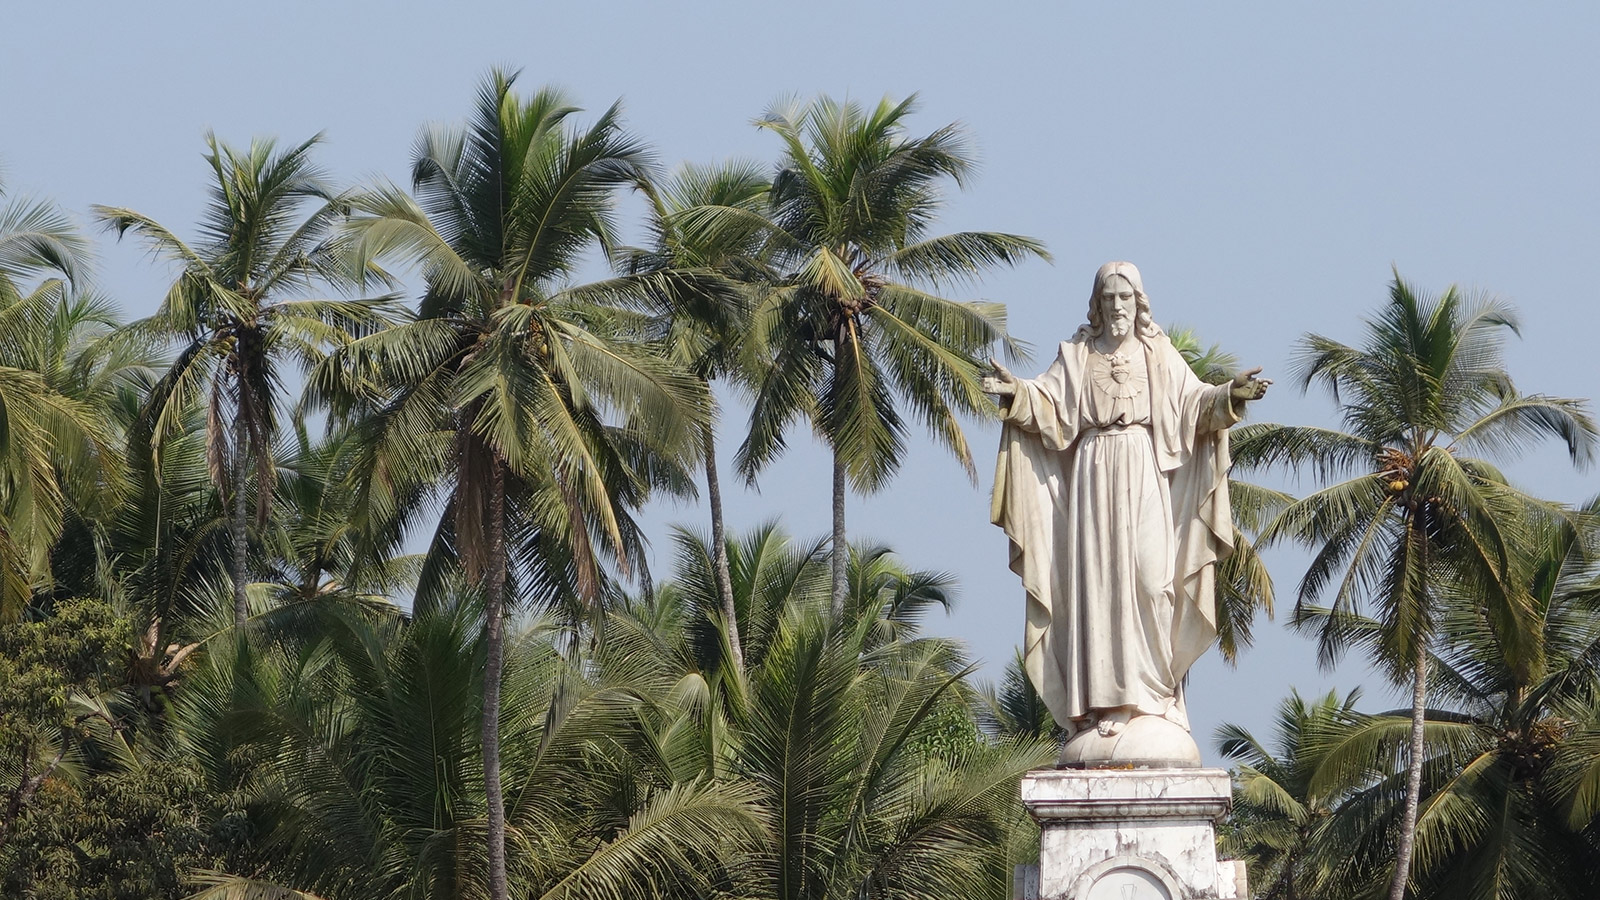 Jesus and palm trees